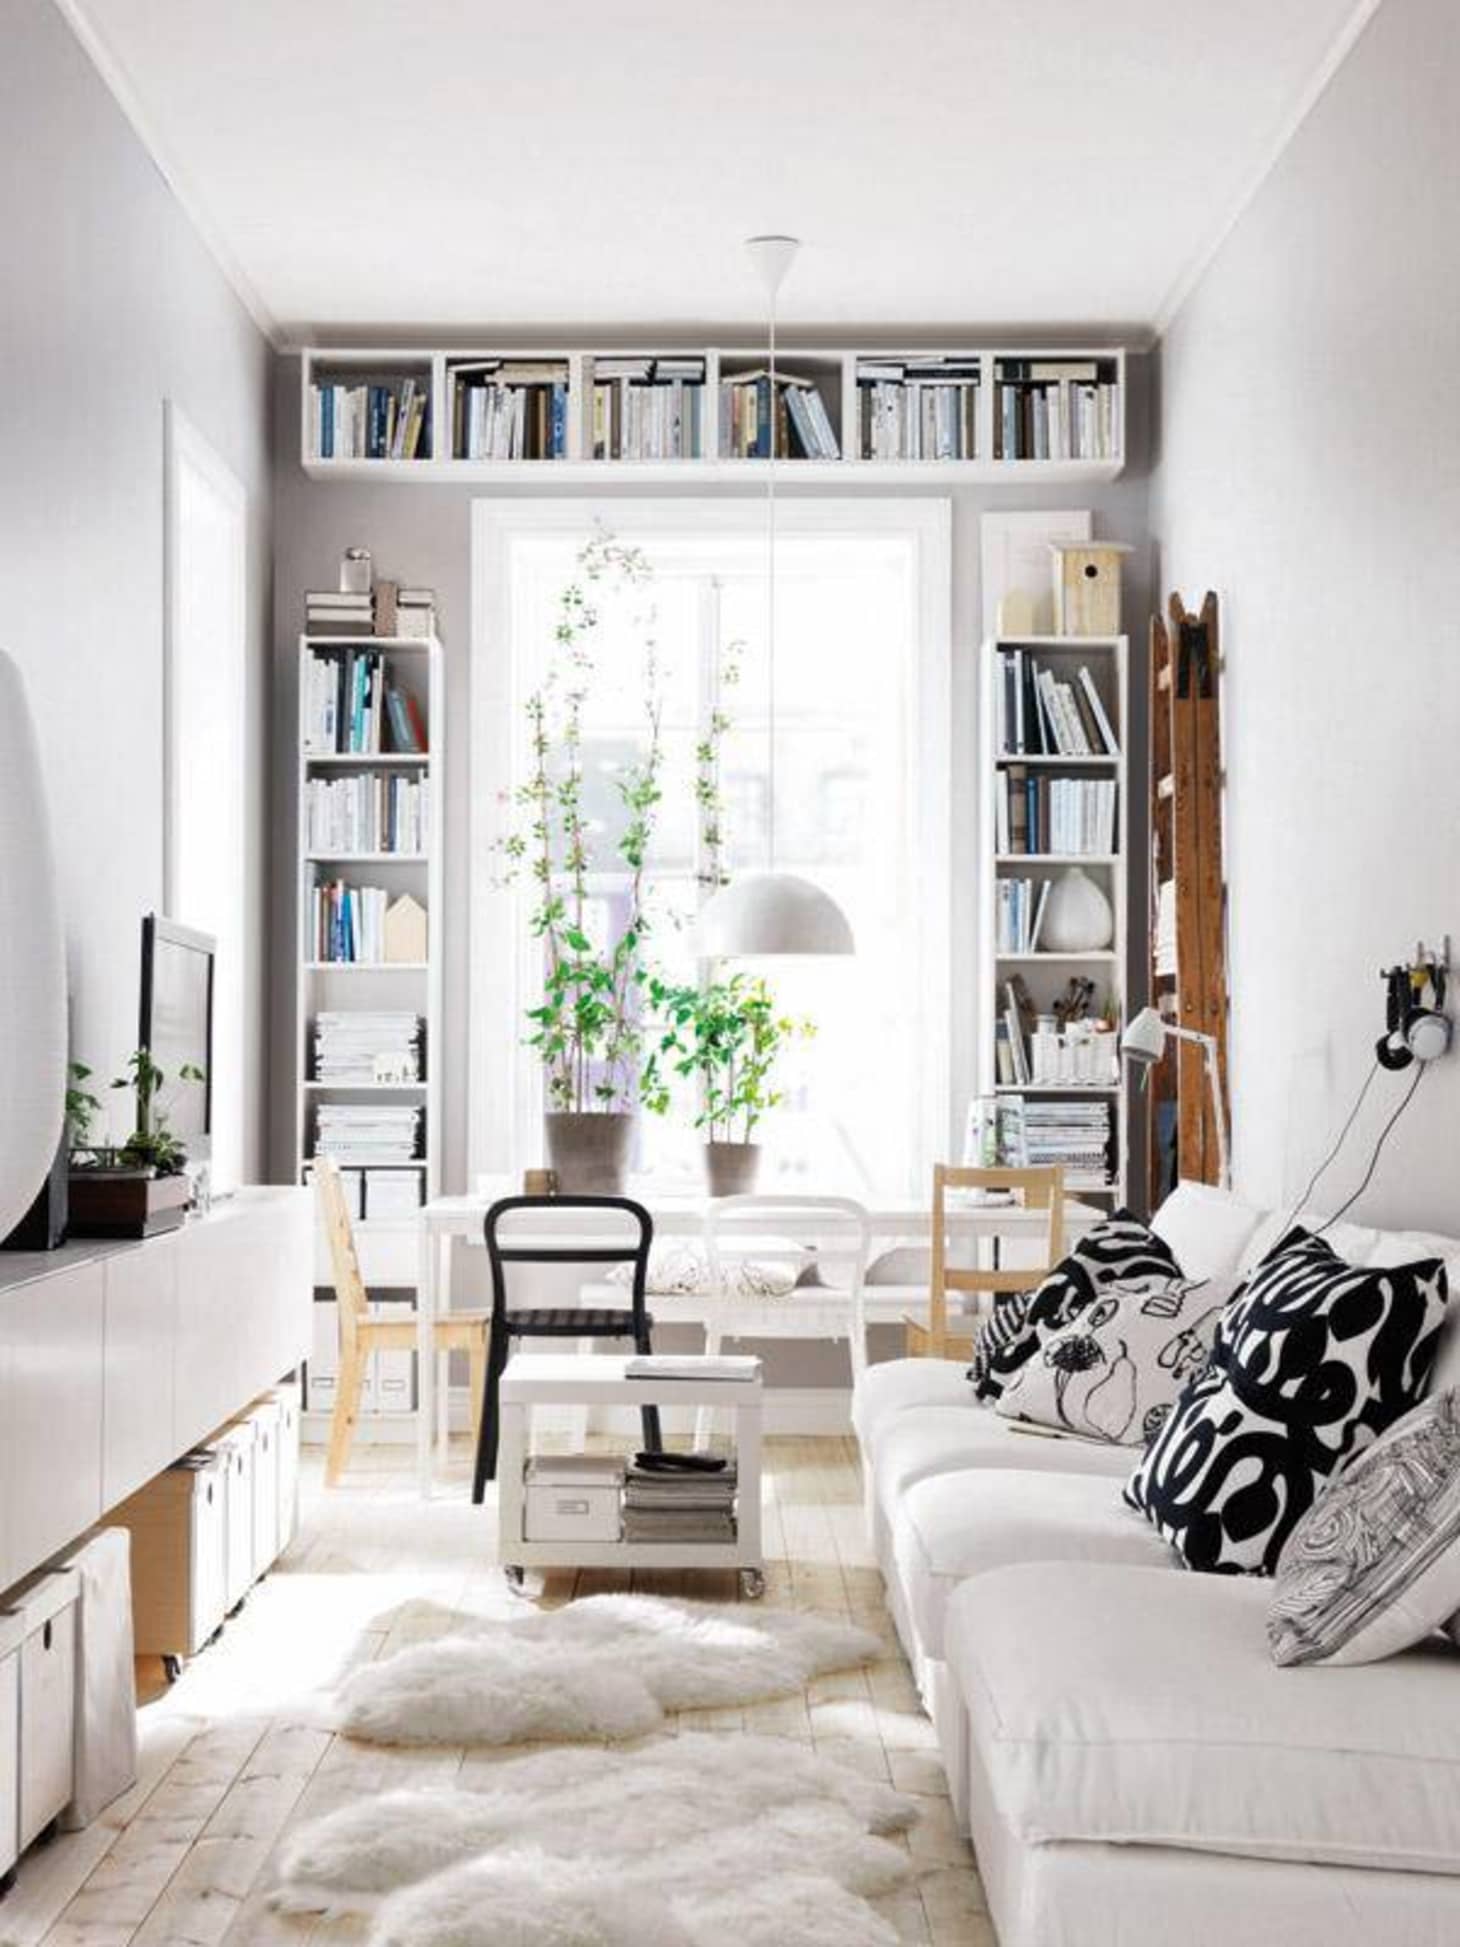 10 Best Interior Design Ideas For Small Spaces